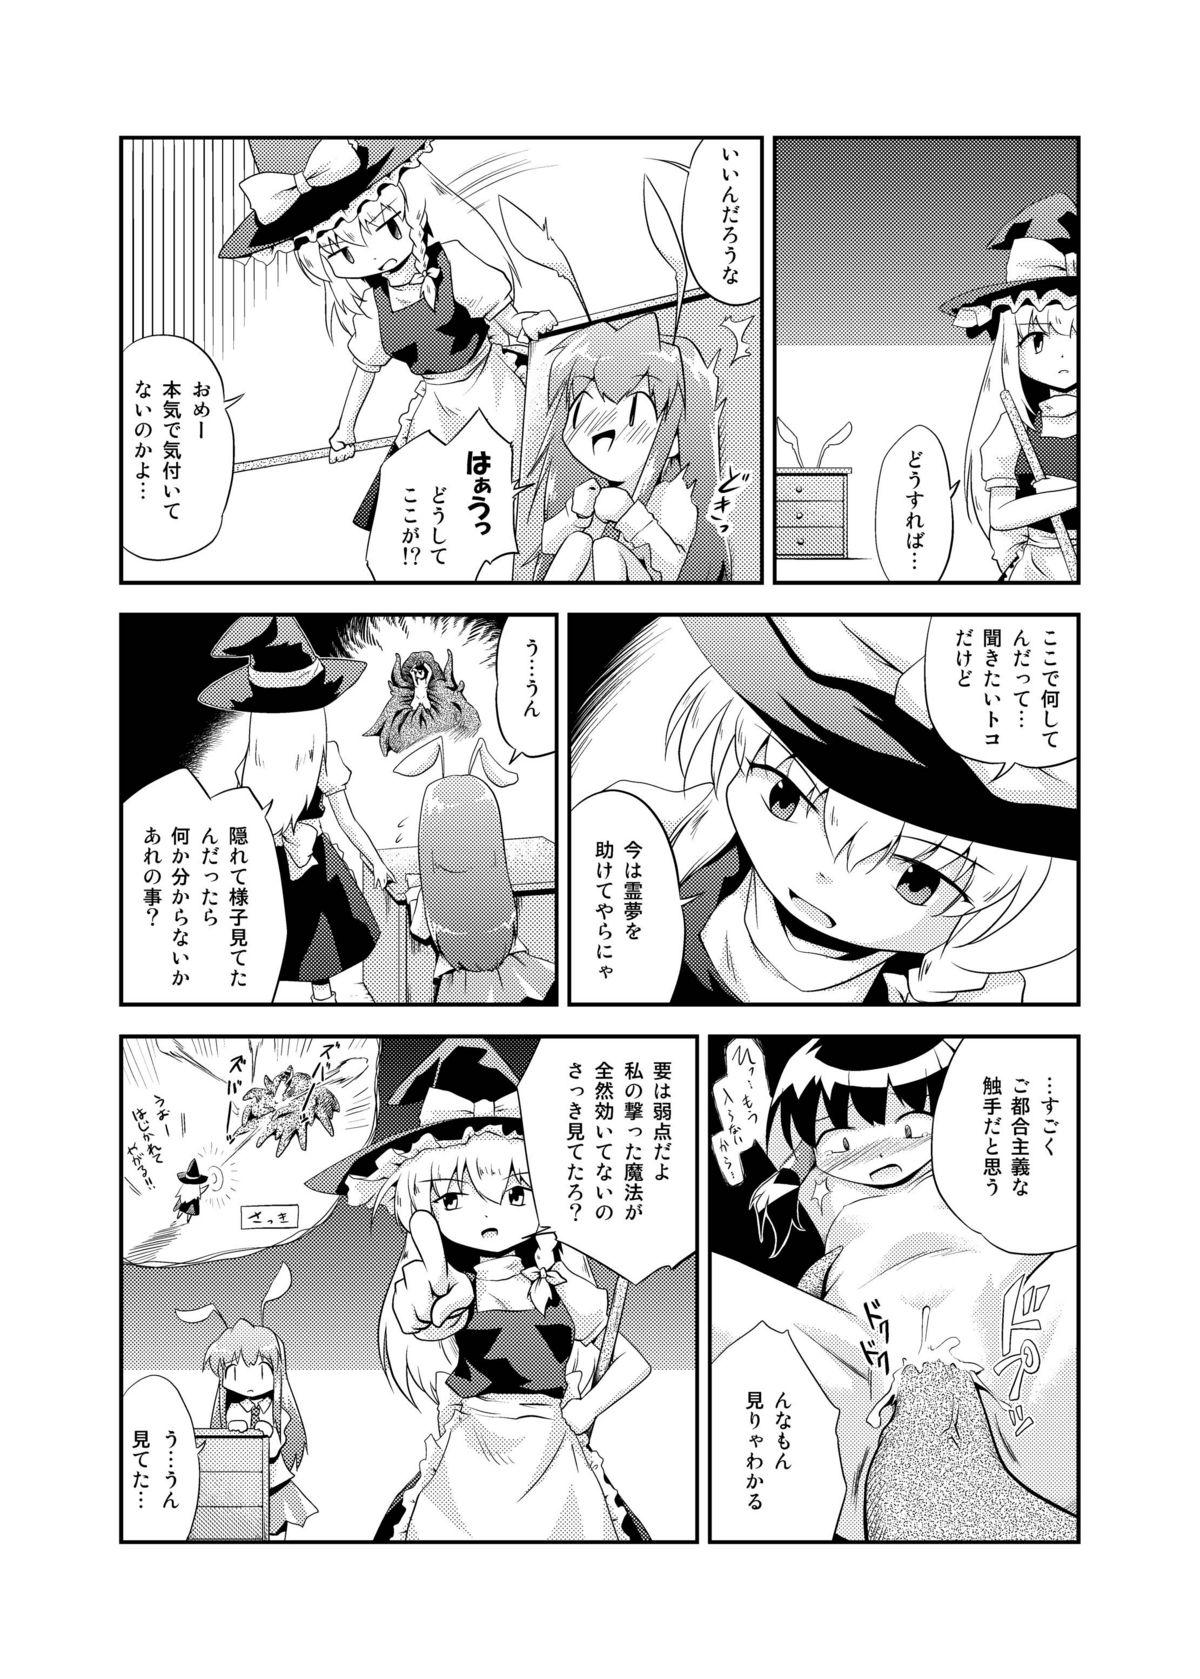 Salope DISARM CLOTHES - Touhou project Home - Page 4